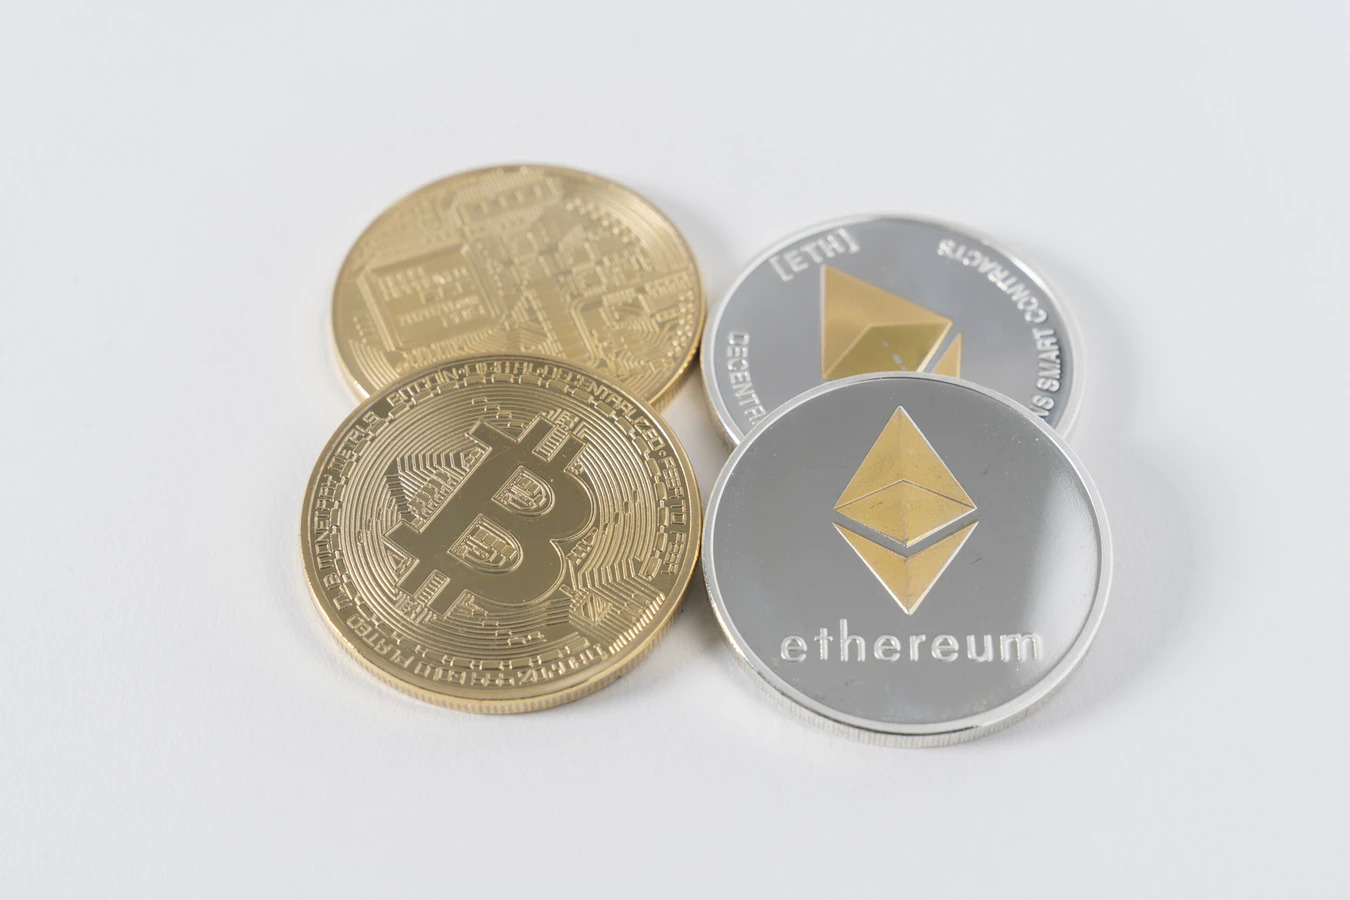 Blog: Differences between Bitcoin and Ethereum